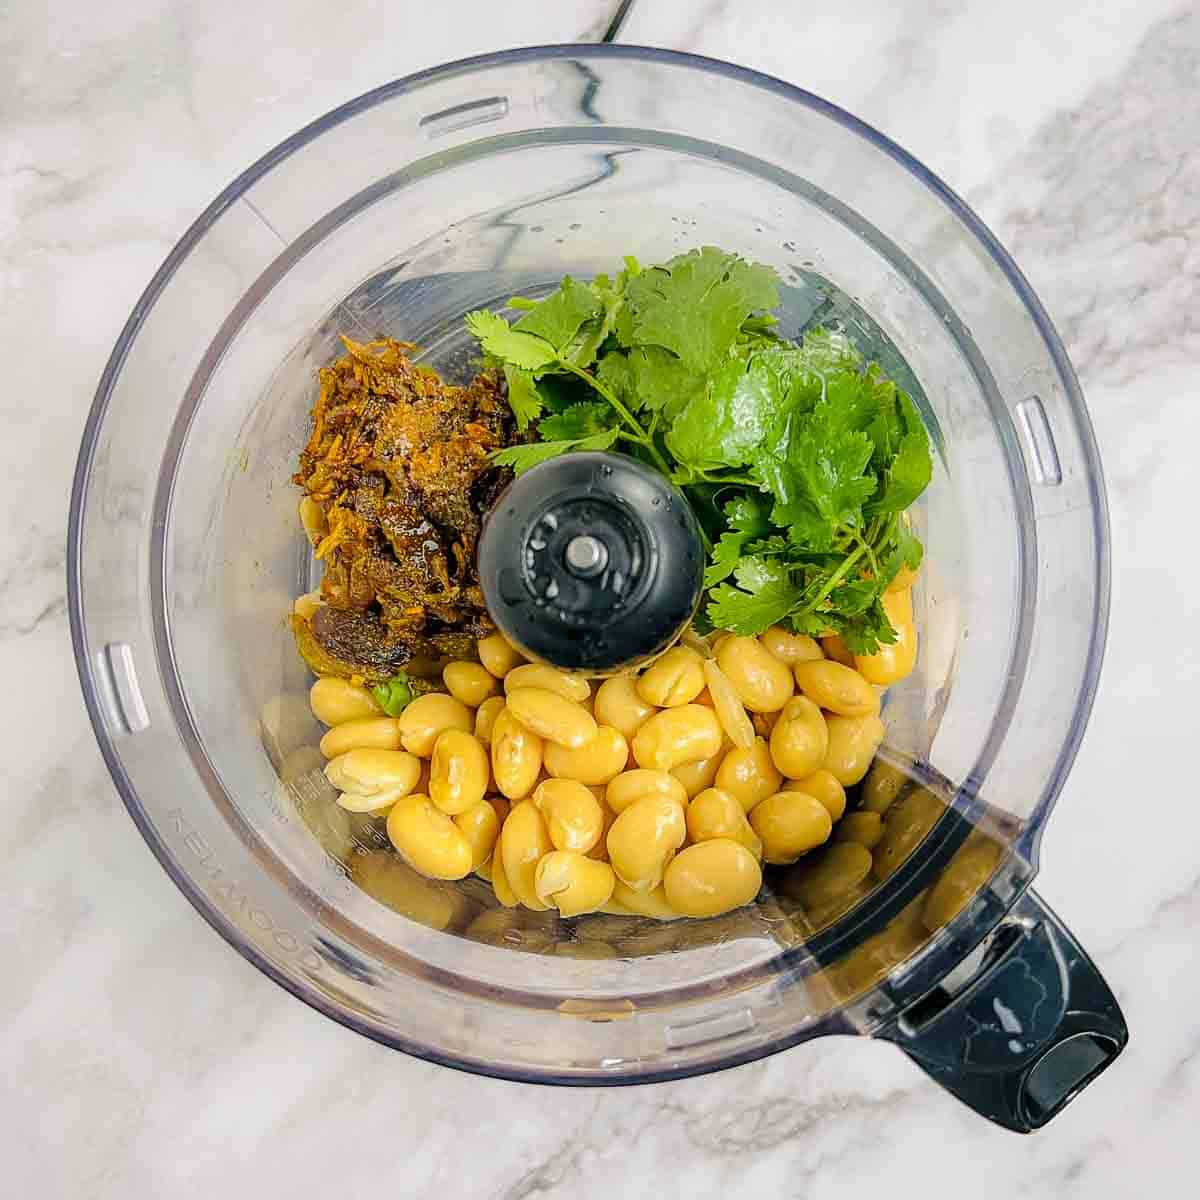 Onion mixture, beans, and cilantro in food processor.